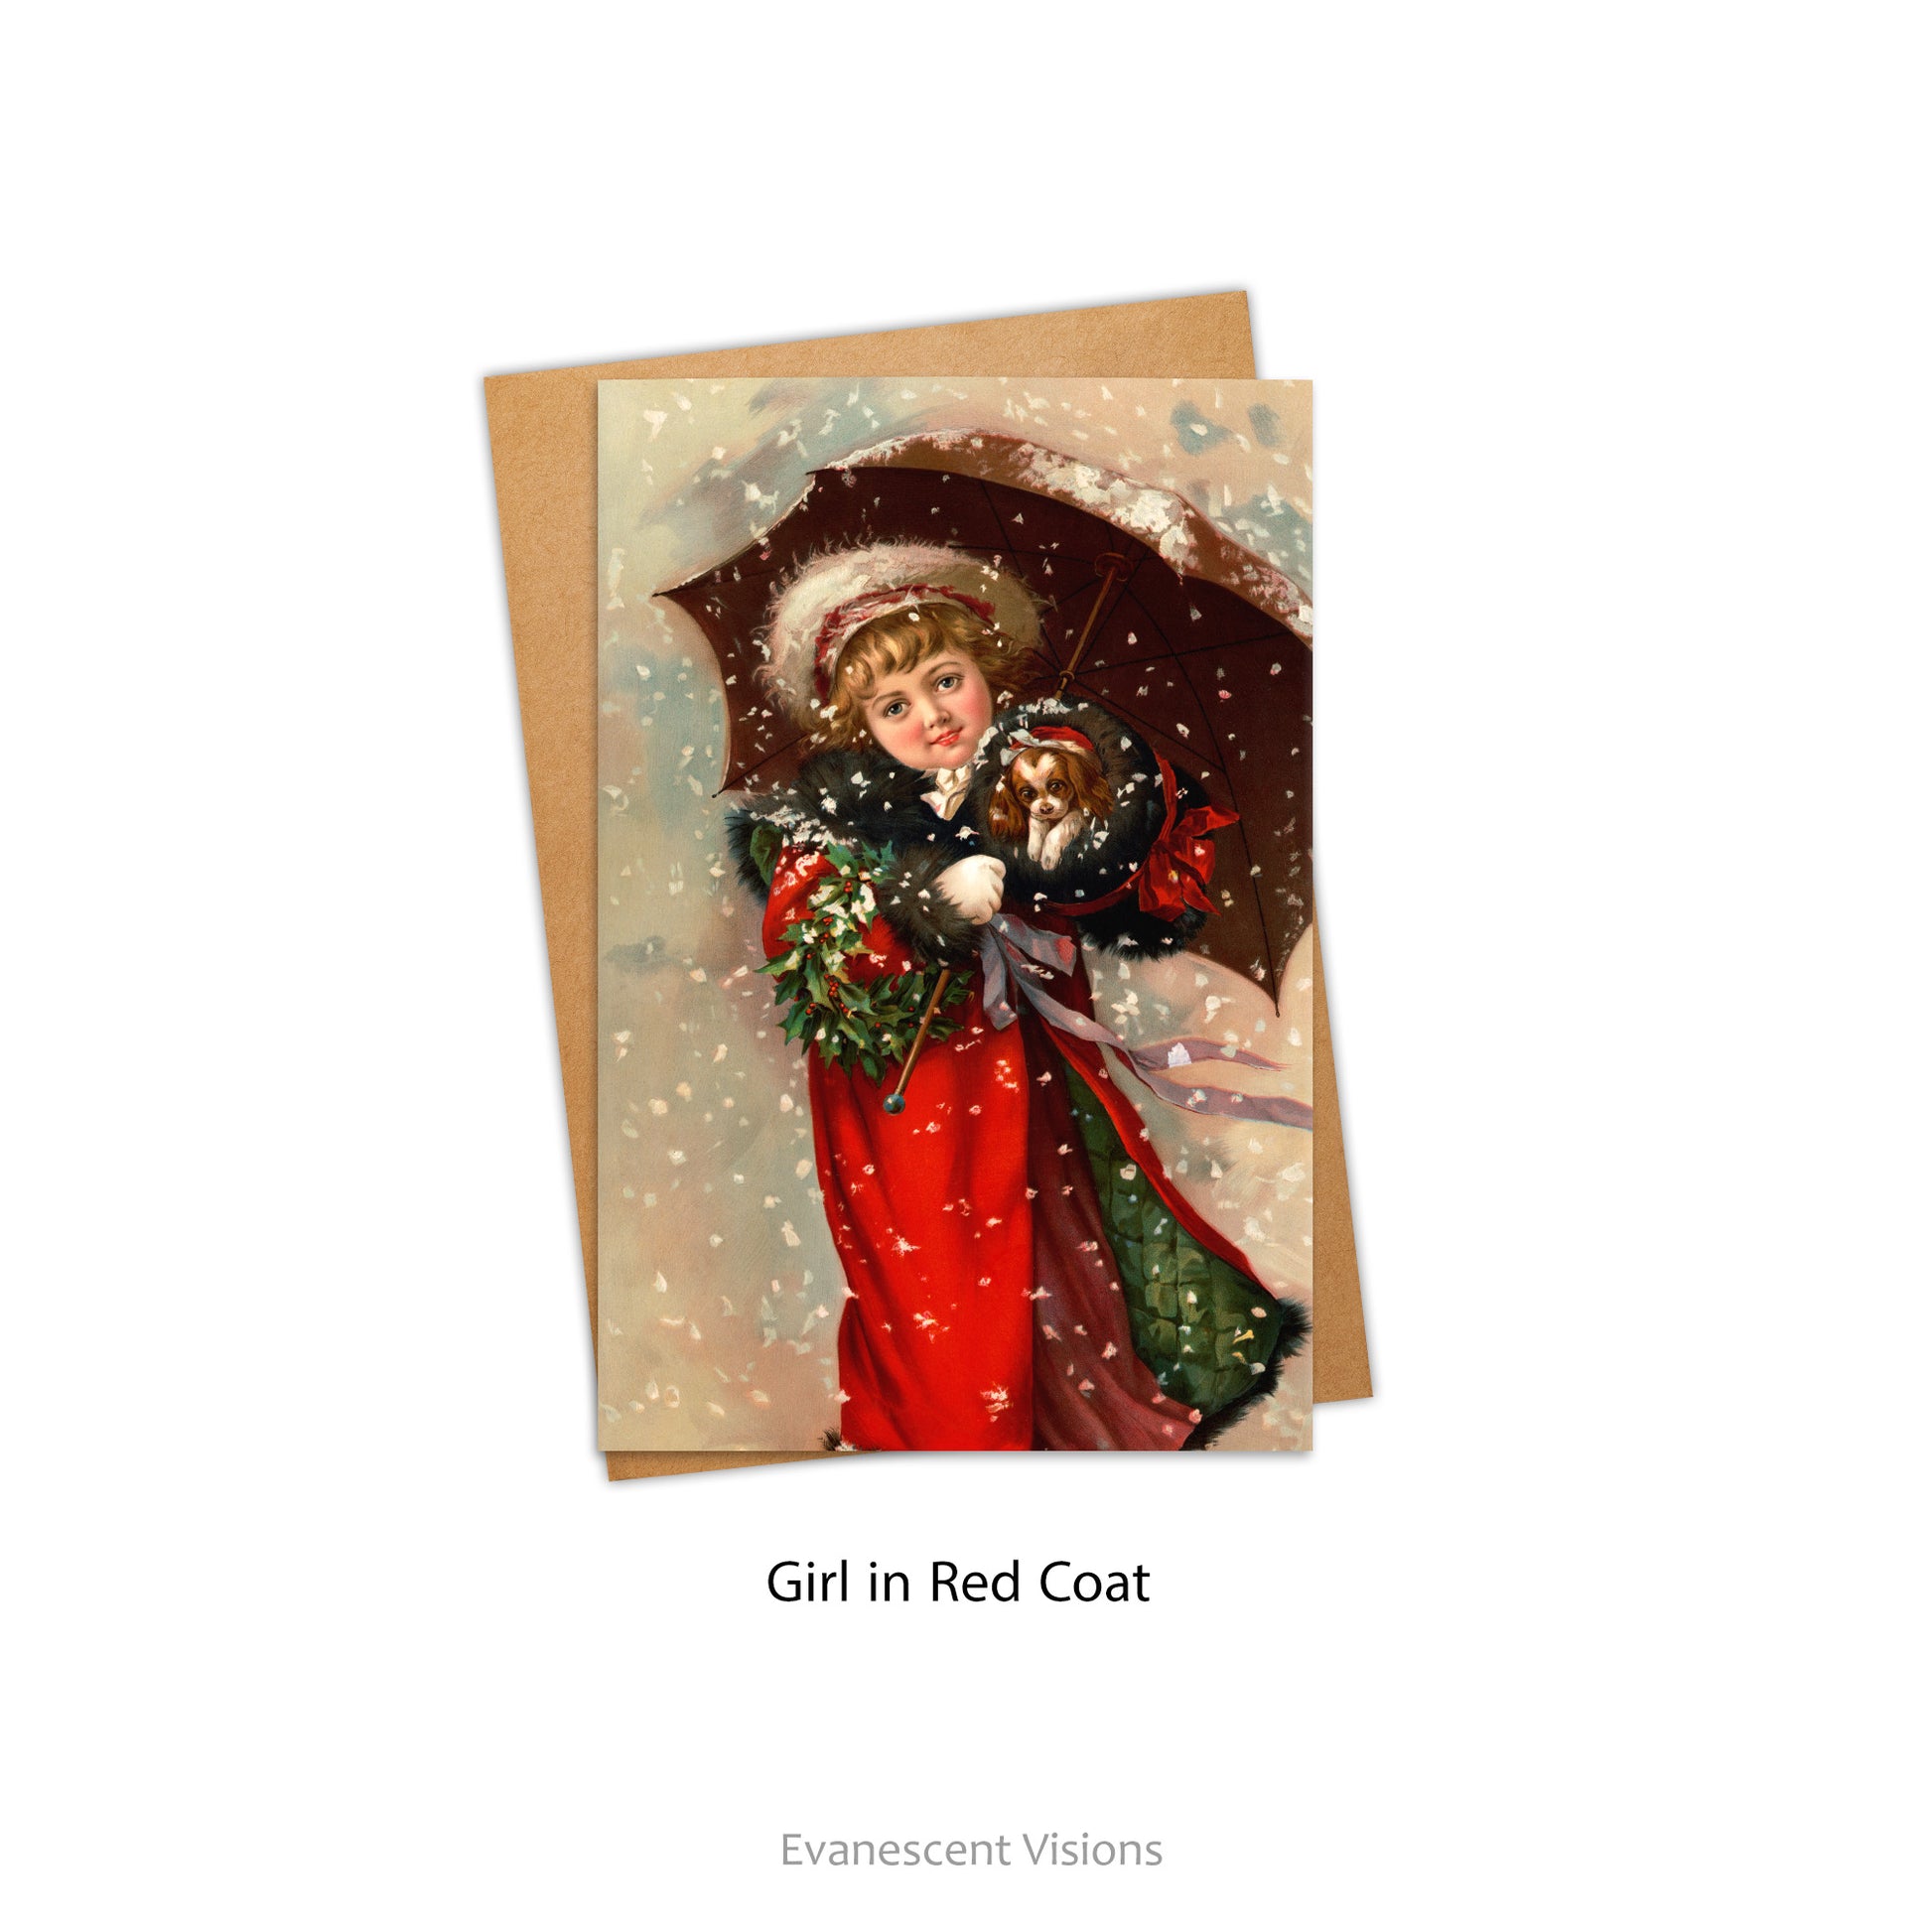 Card and envelope. Card shows a snowy image of little girl in red coat holding an umbrella and a puppy in her muff, with a wreath of holly